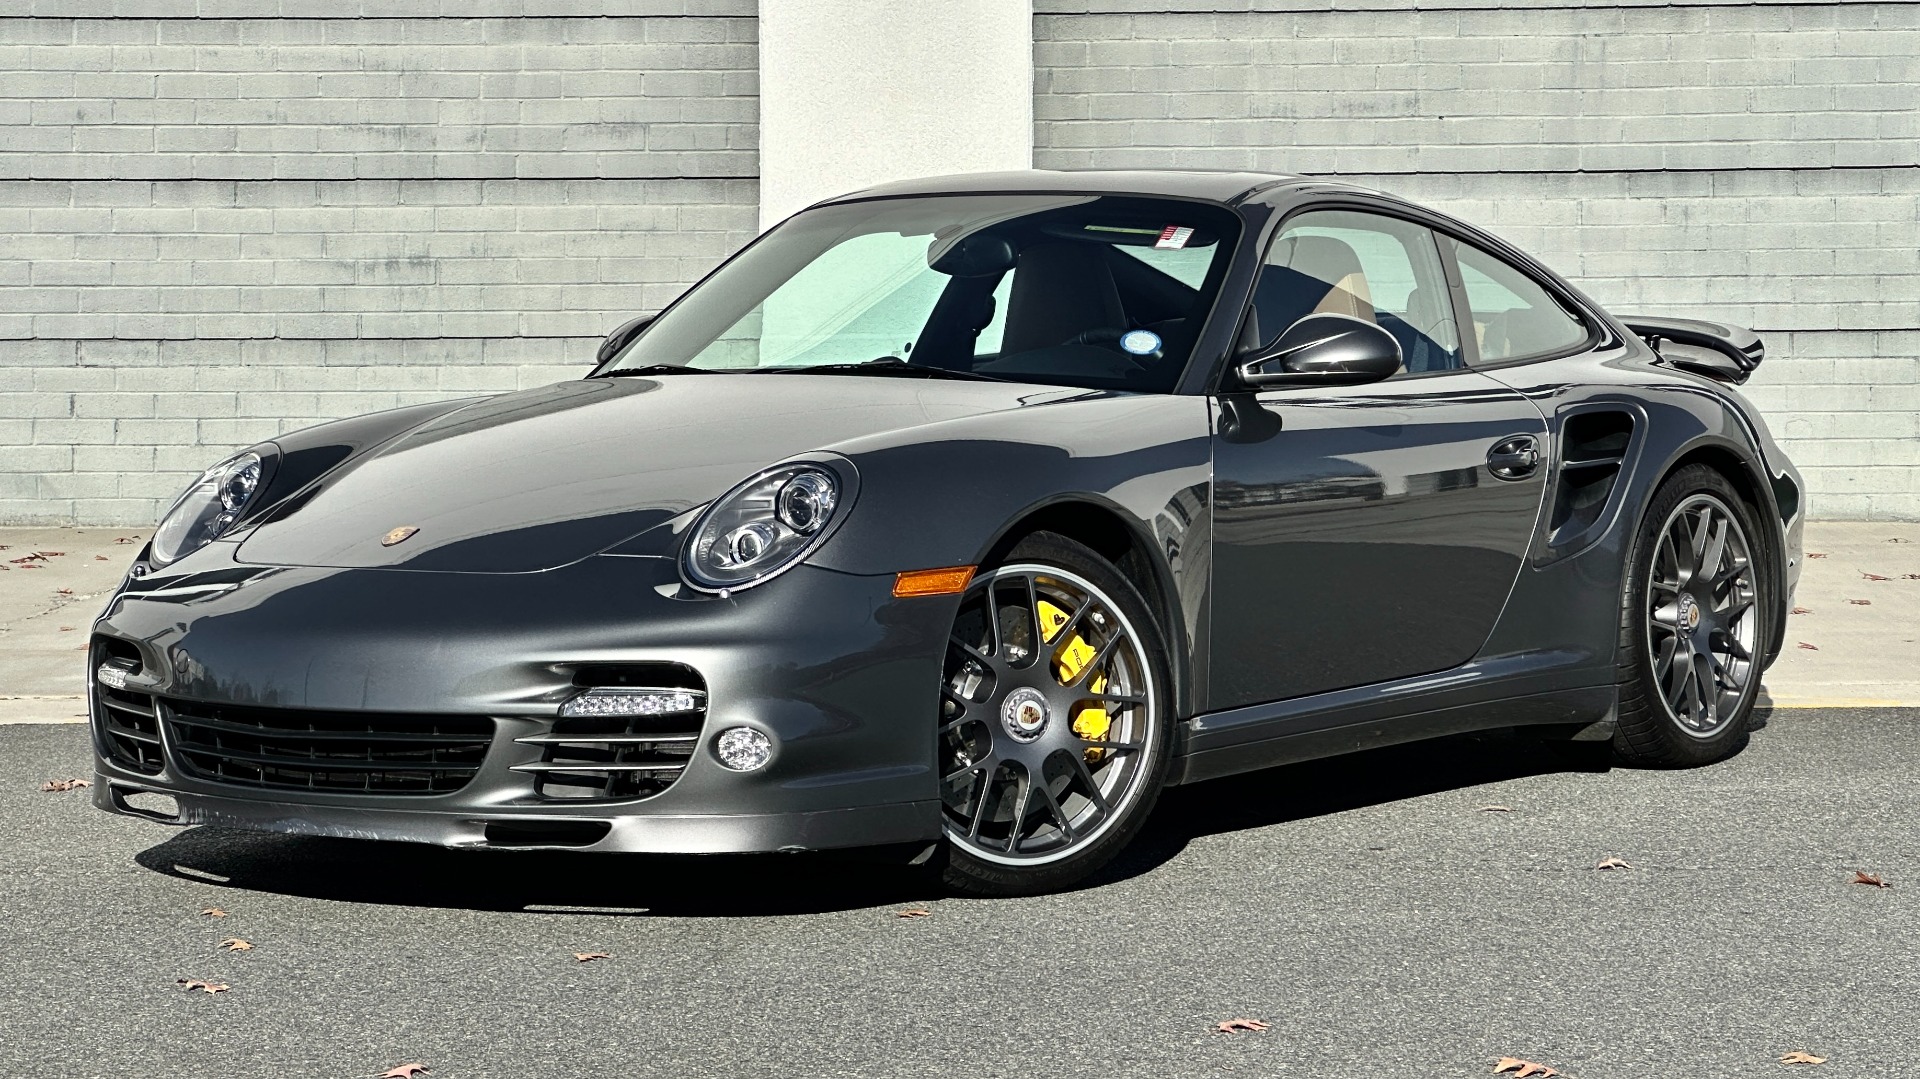 Used 2012 Porsche 911 TURBO S / CENTER LOCK WHEELS / FULL LEATHER INTERIOR / YELLOW CALIPERS / PA for sale Sold at Formula Imports in Charlotte NC 28227 1